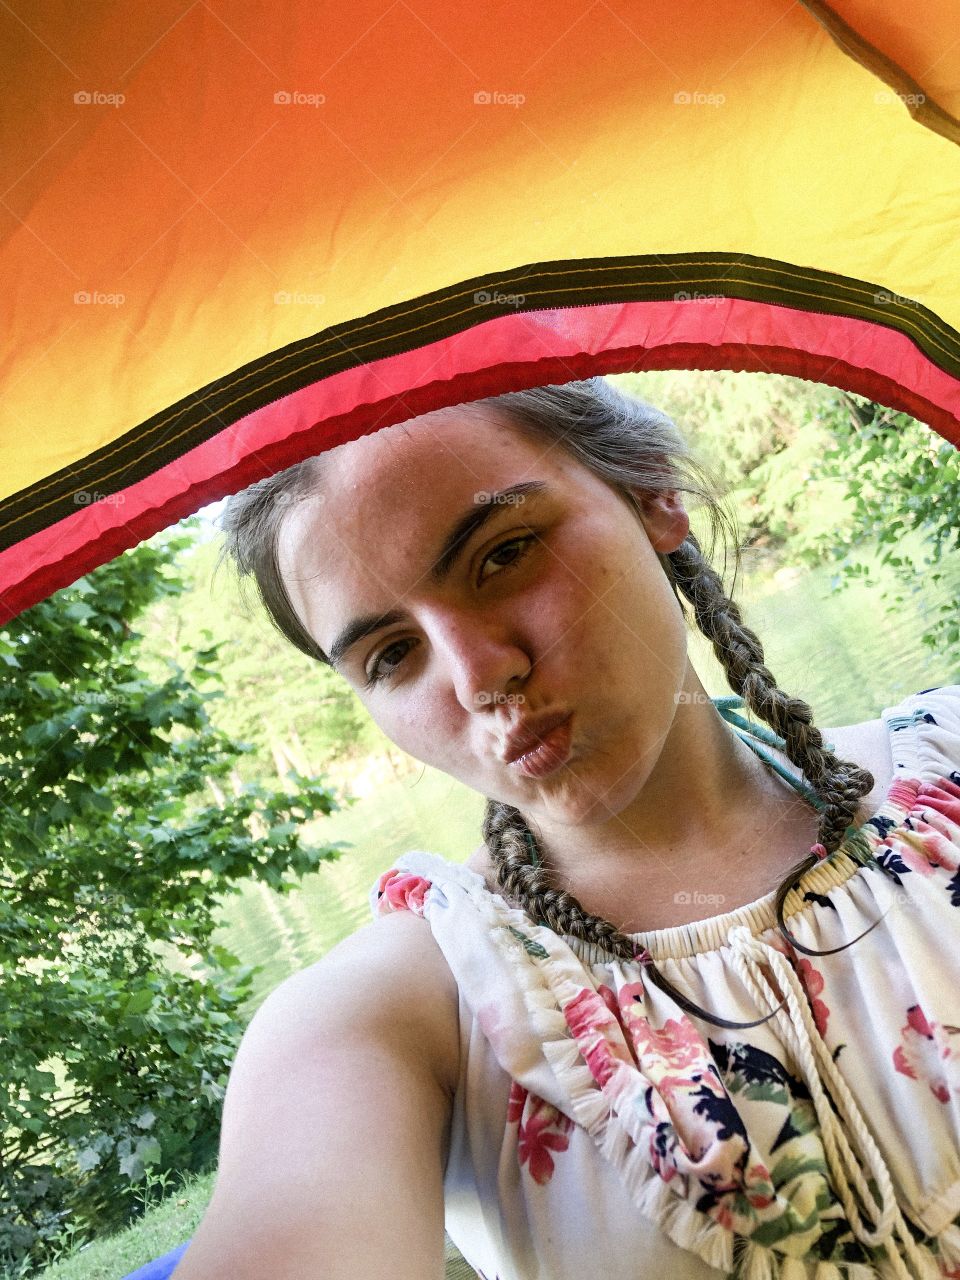 Selfie in the tent, sorry my braid is kind of messed up but the background is to die for! 